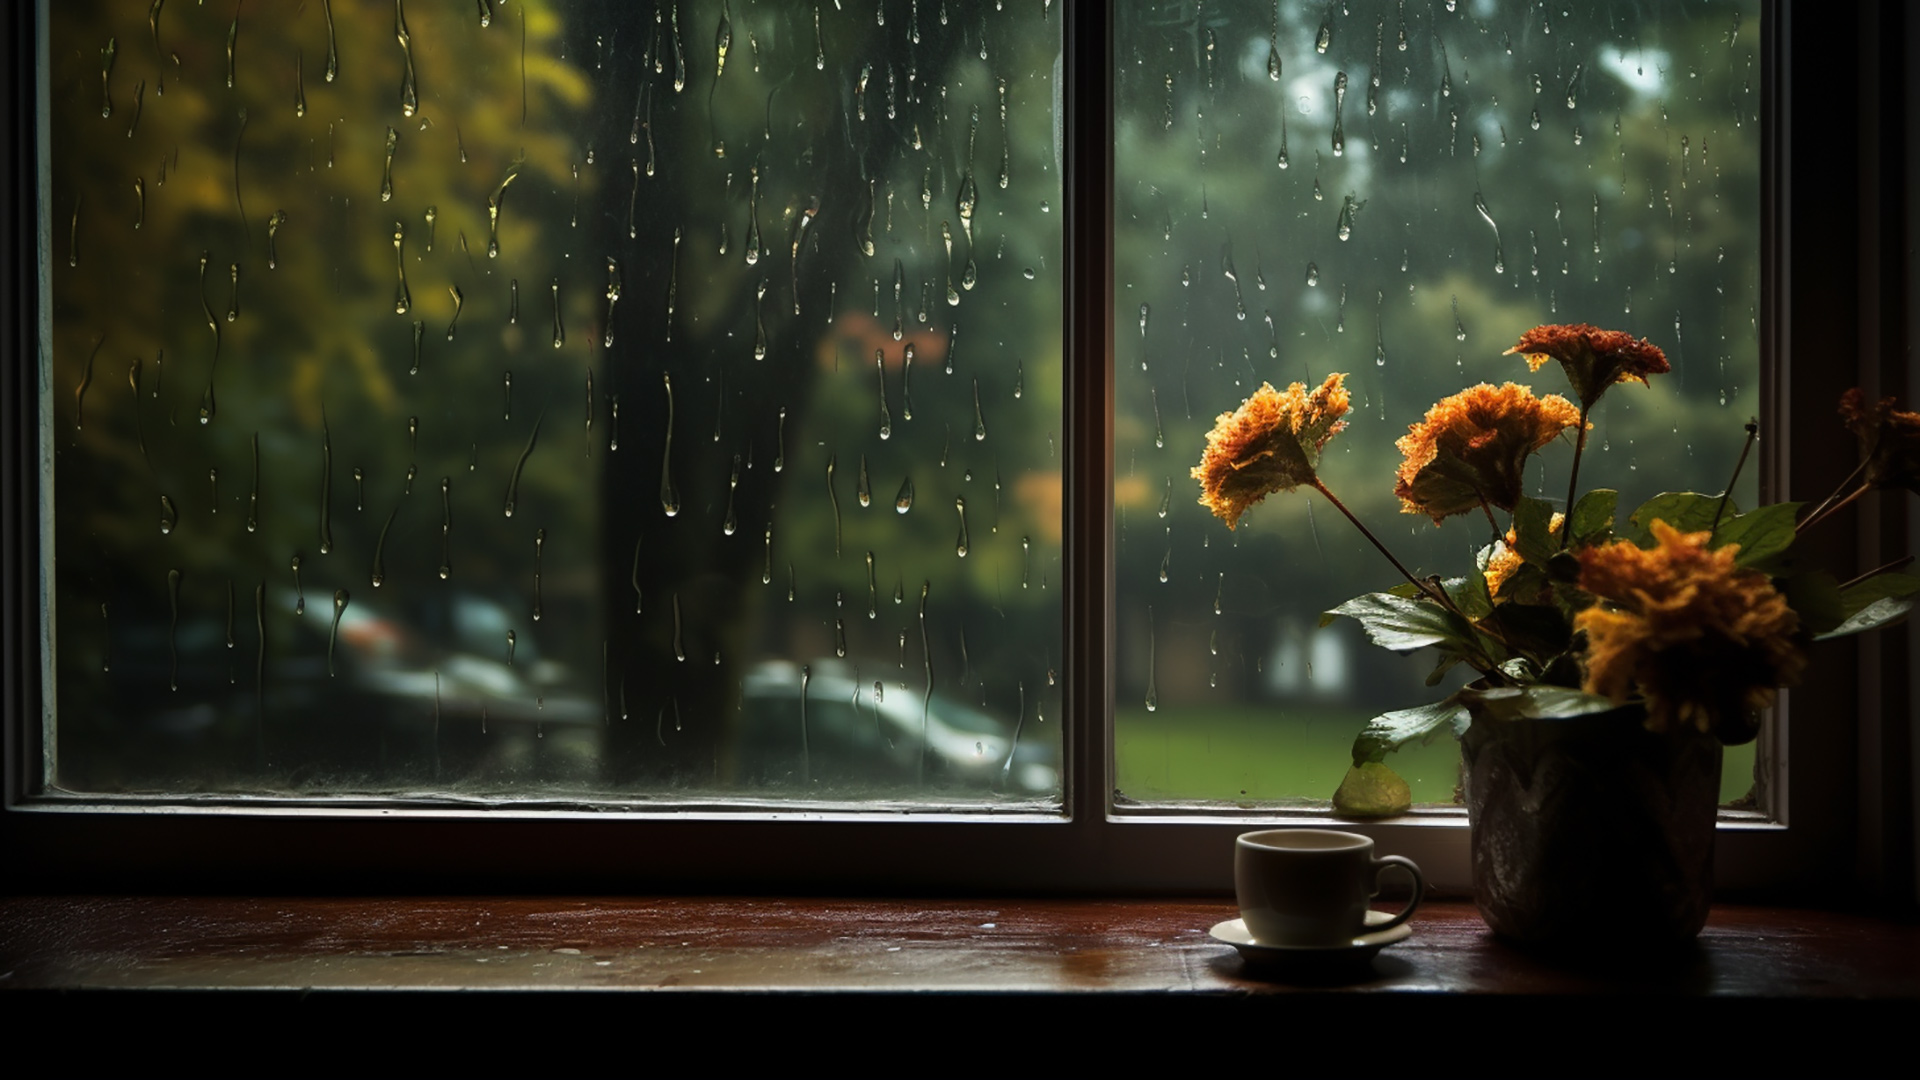 Serene rainy view desktop backgrounds for stress relief